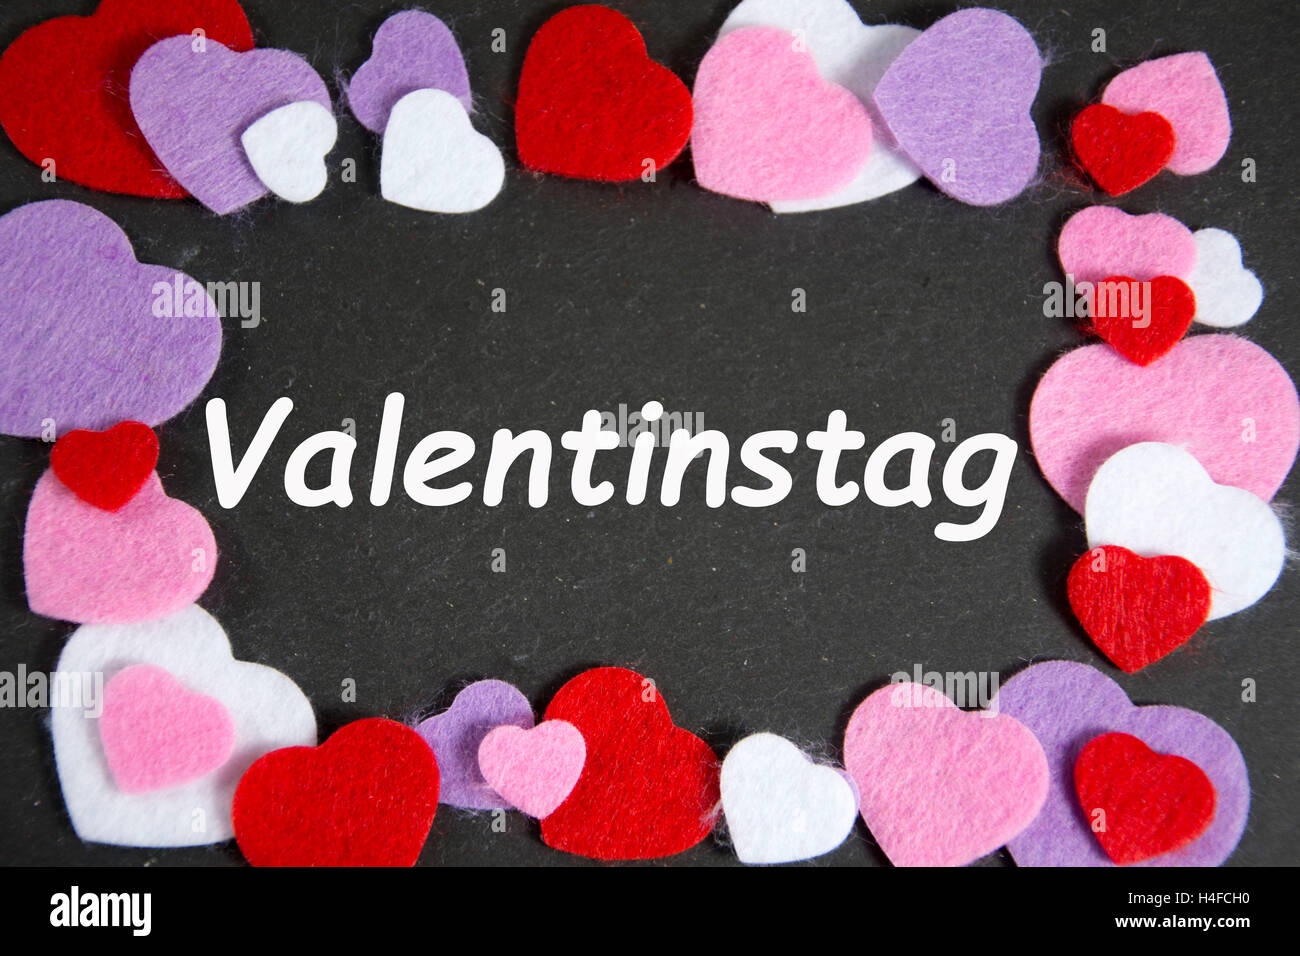 Valentinstag - the germanw word for Valentine´s Day Stock Photo